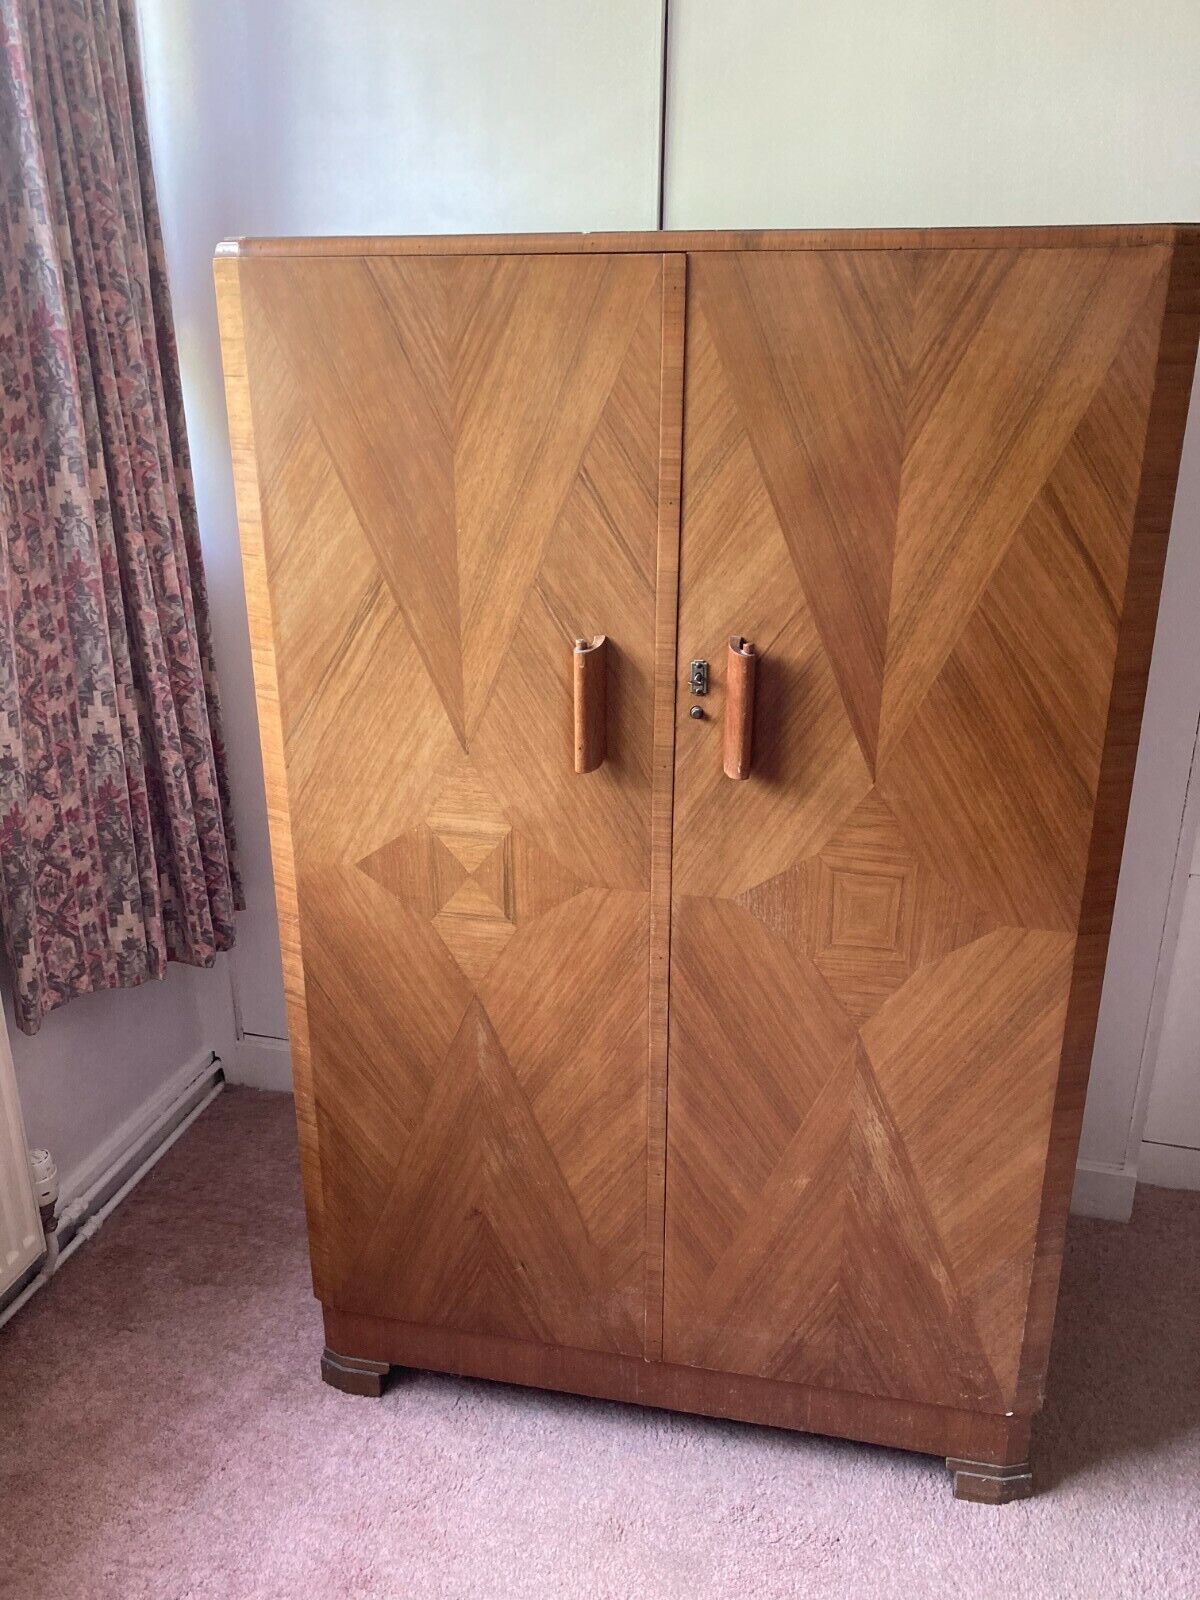 Buy Vintage Retro Double Door Wardrobe, Removable Shelves - Wooden With Lock And Key